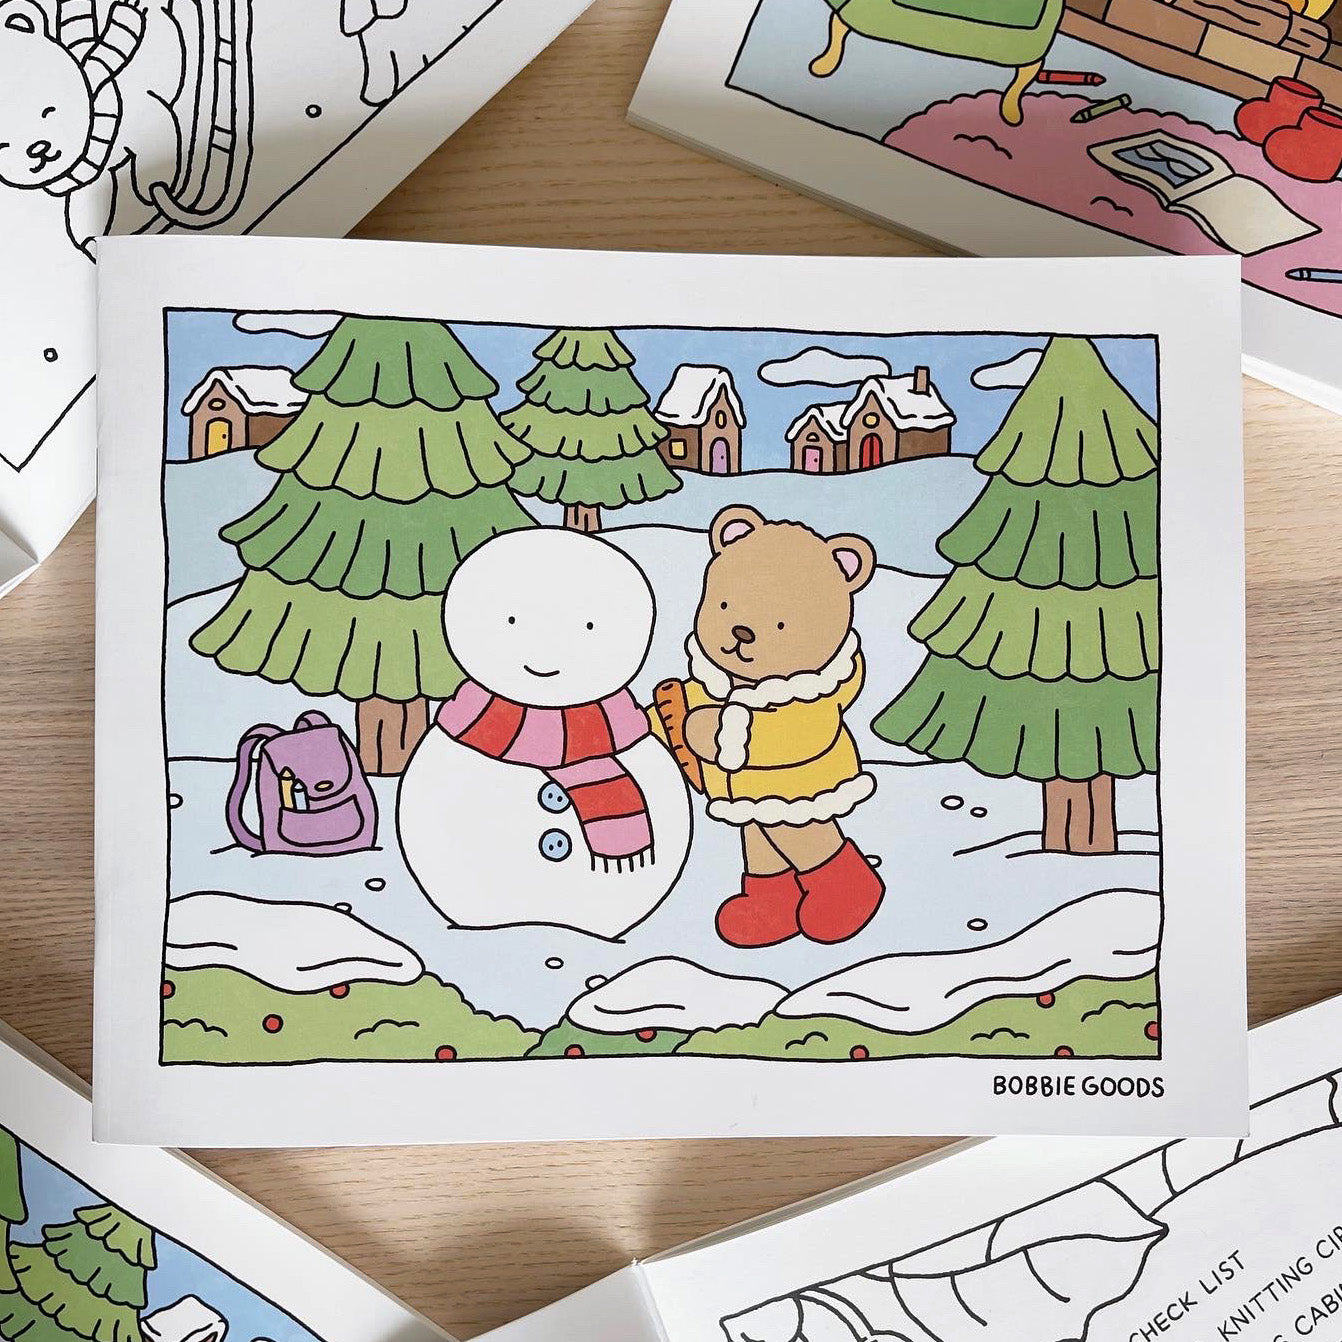 Frank Coloring book of The New Year and Winter Activities For Kids VOL 1